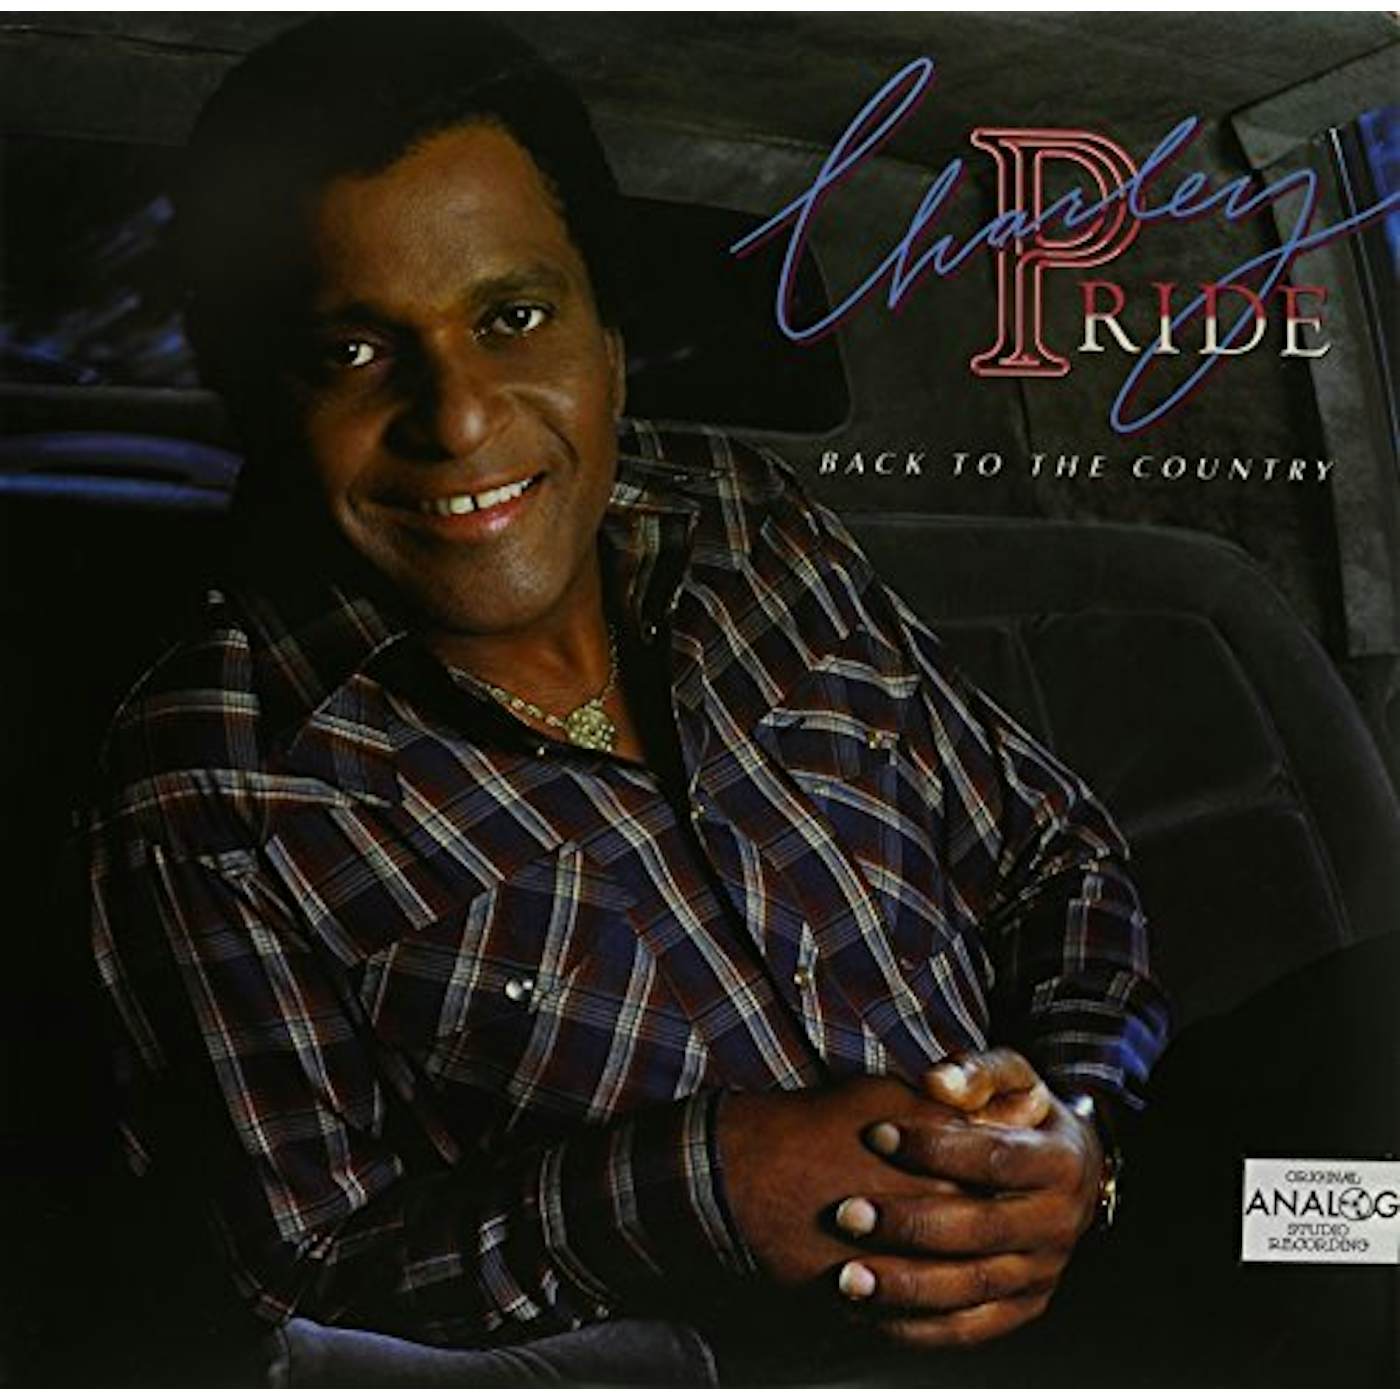 Charley Pride Back to the Country Vinyl Record